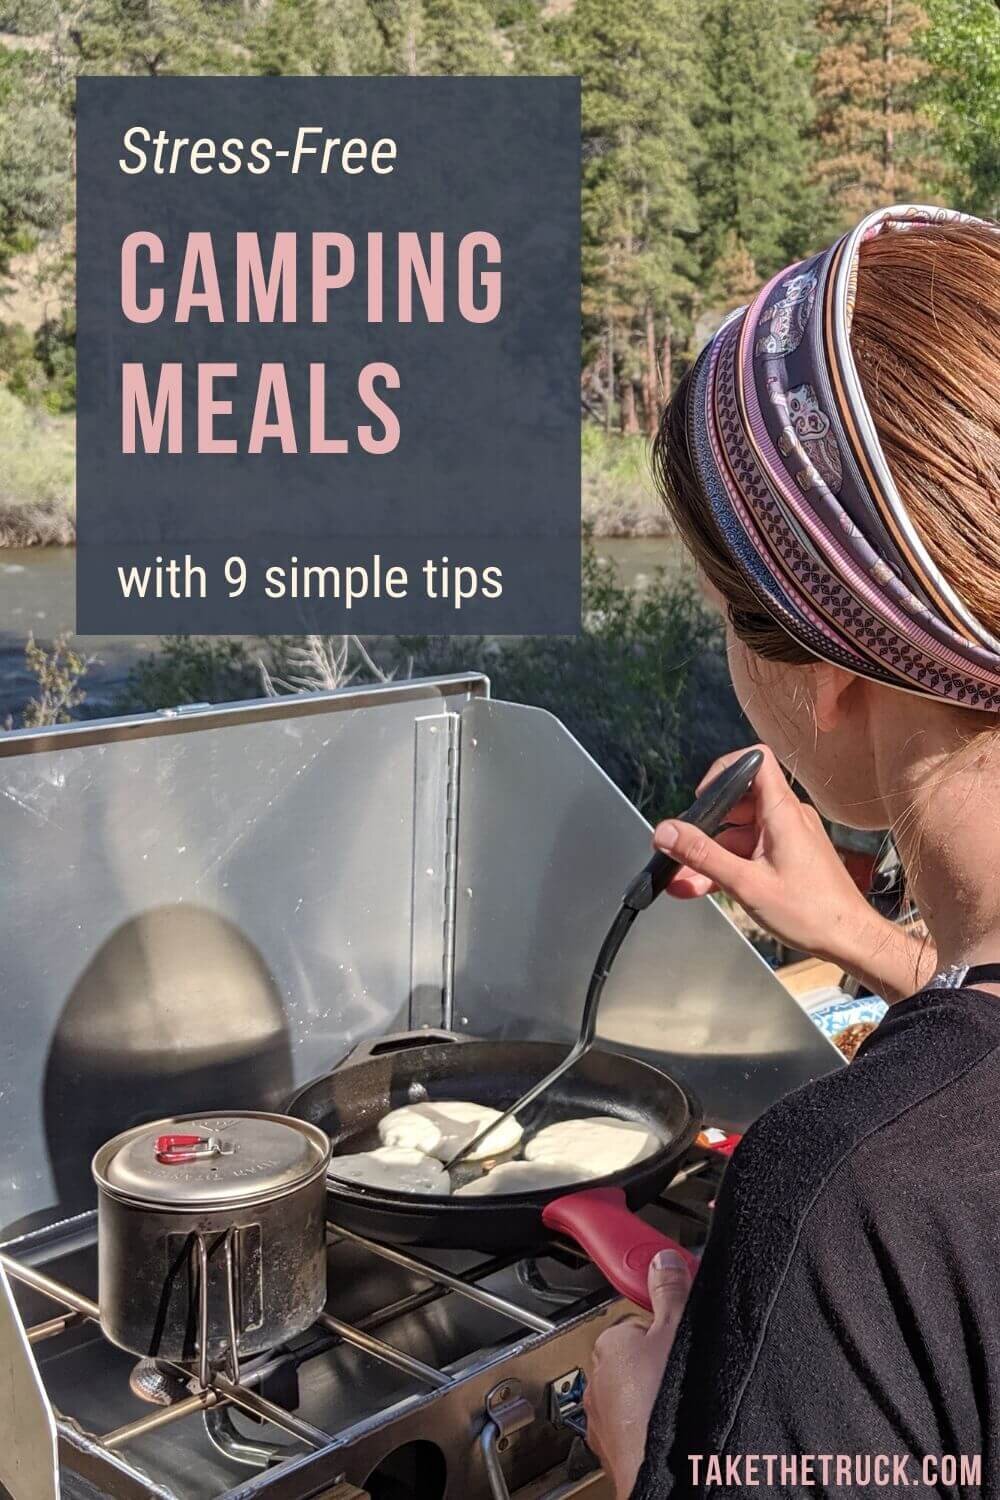 Check out these 9 tips to get you started on planning and preparing easy camping meals for your next camping trip. During your adventure, you can have stress-free food options ready to go! 